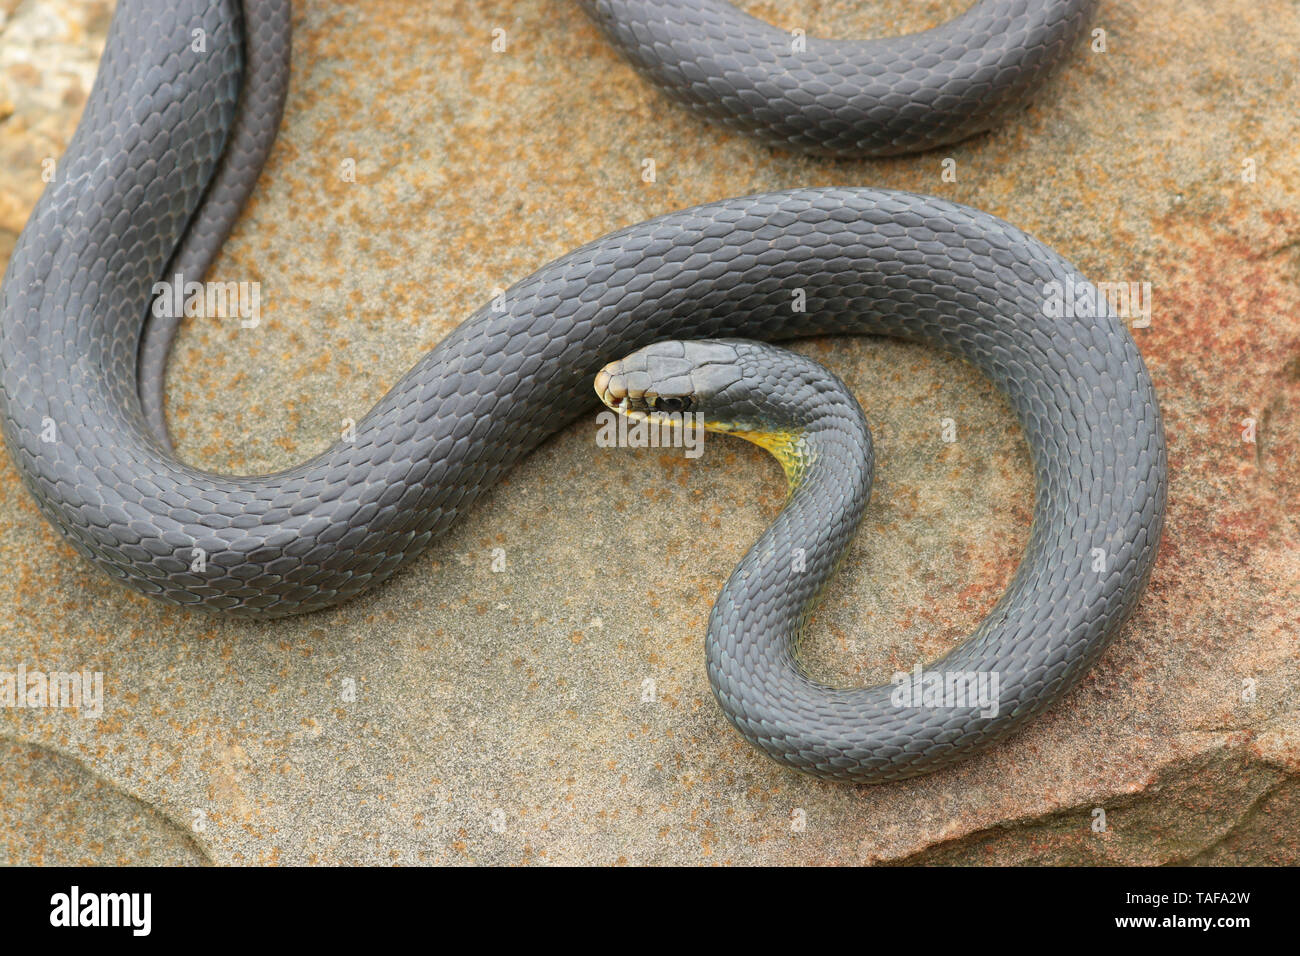 Eastern Yellow-bellied Racer Snake (Coluber constrictor flaviventris) Stock Photo